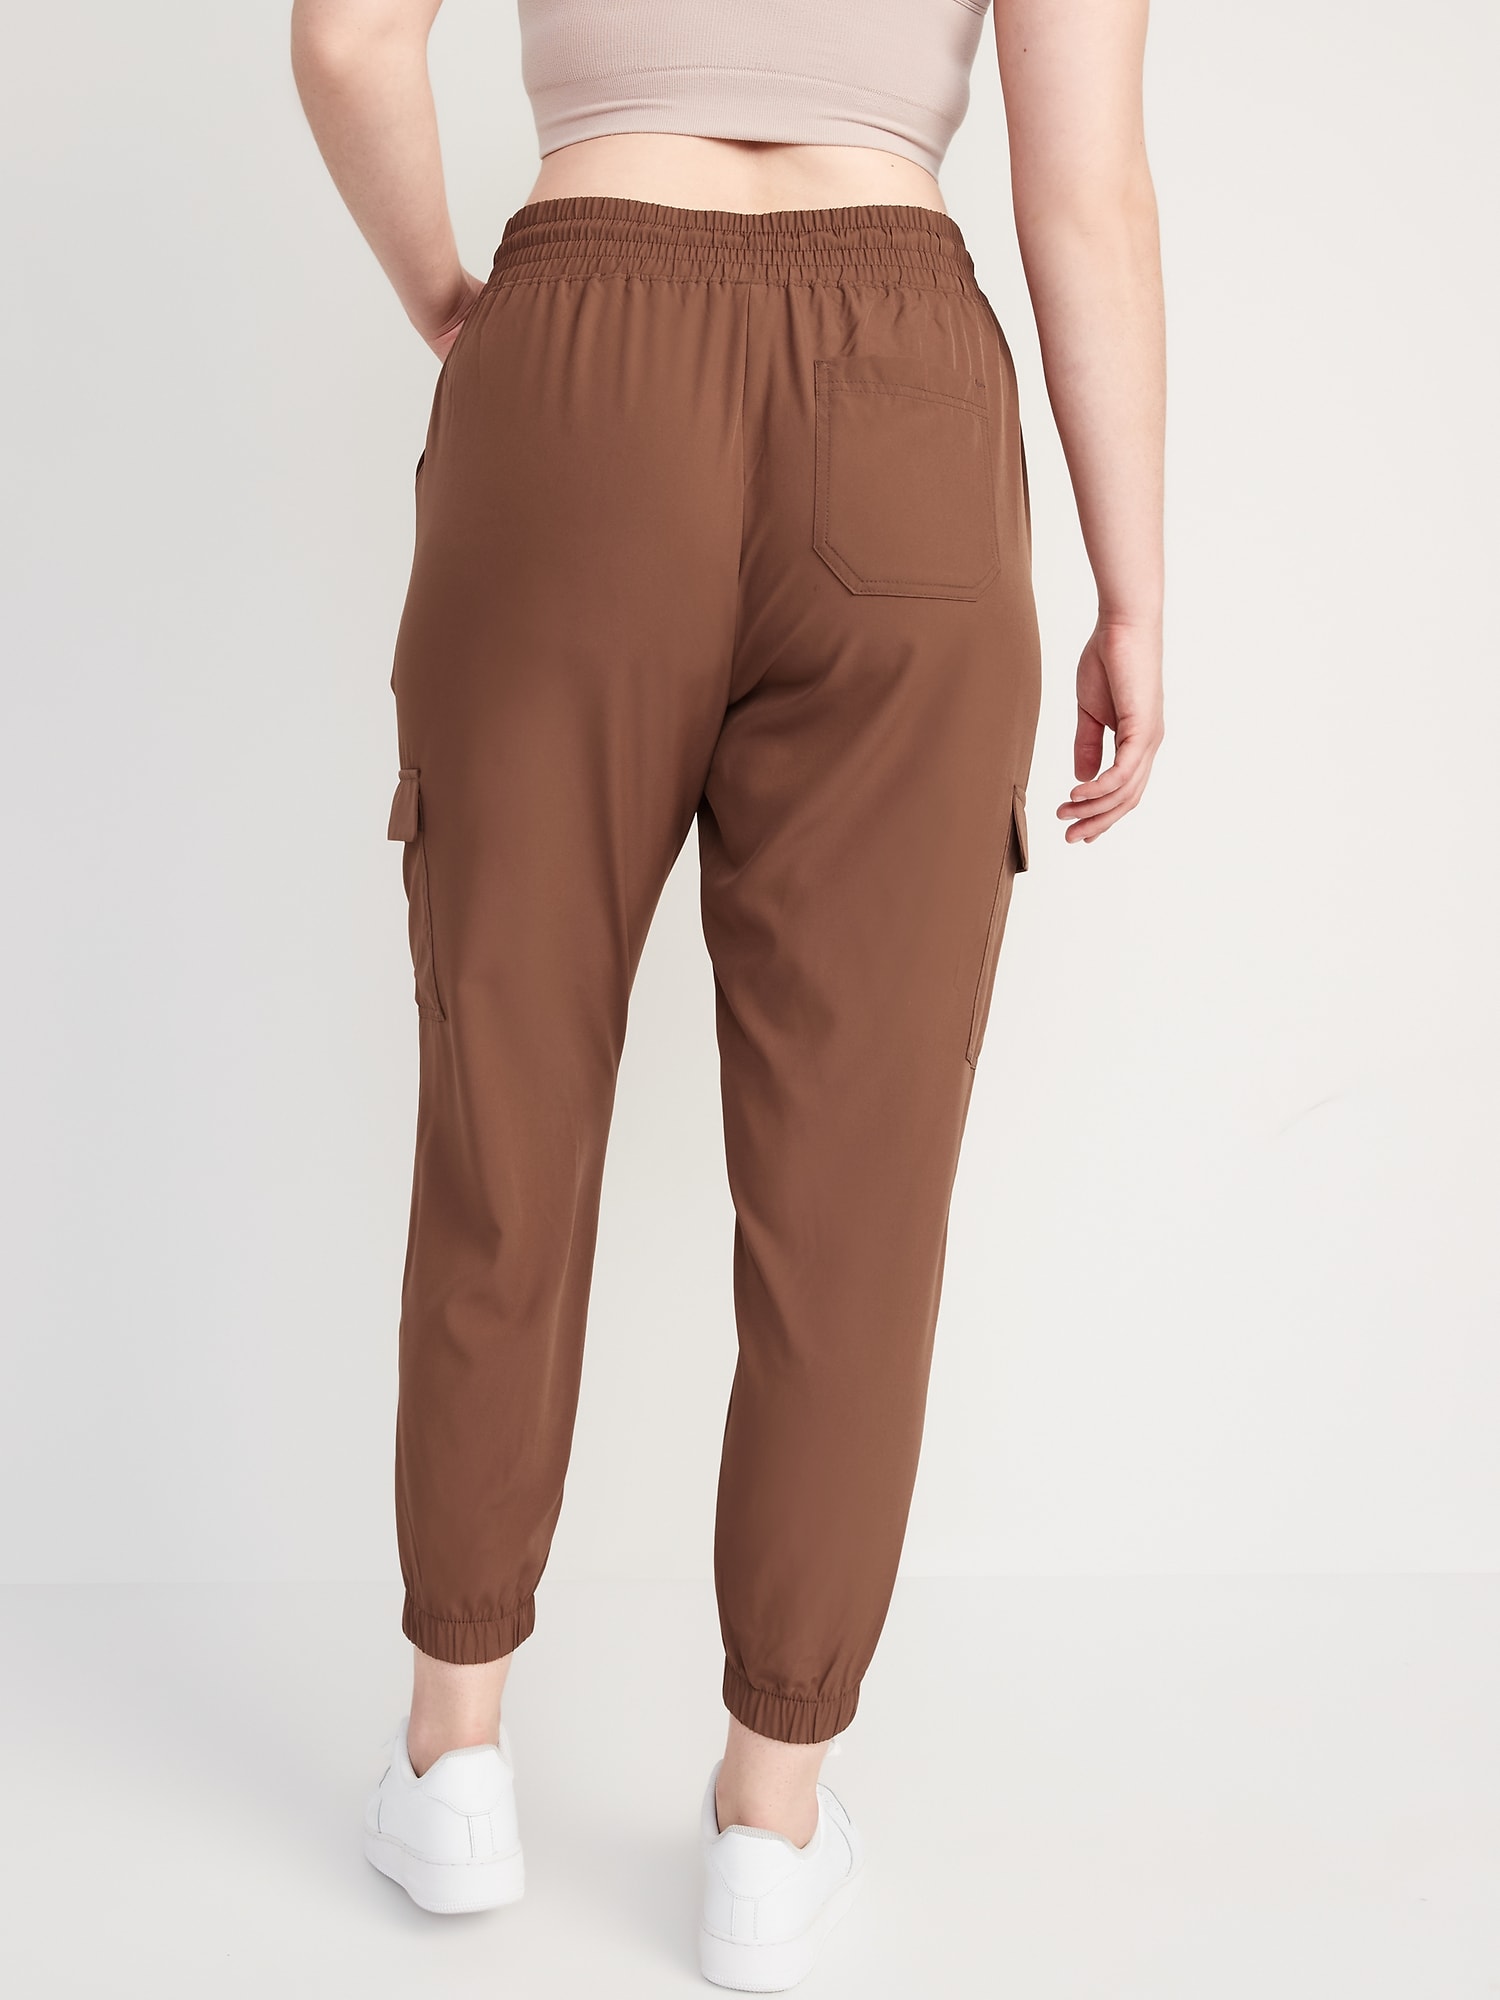 Old Navy Women's High-Waisted Stretchtech Cargo Jogger Pants - Brown - Tall Size L